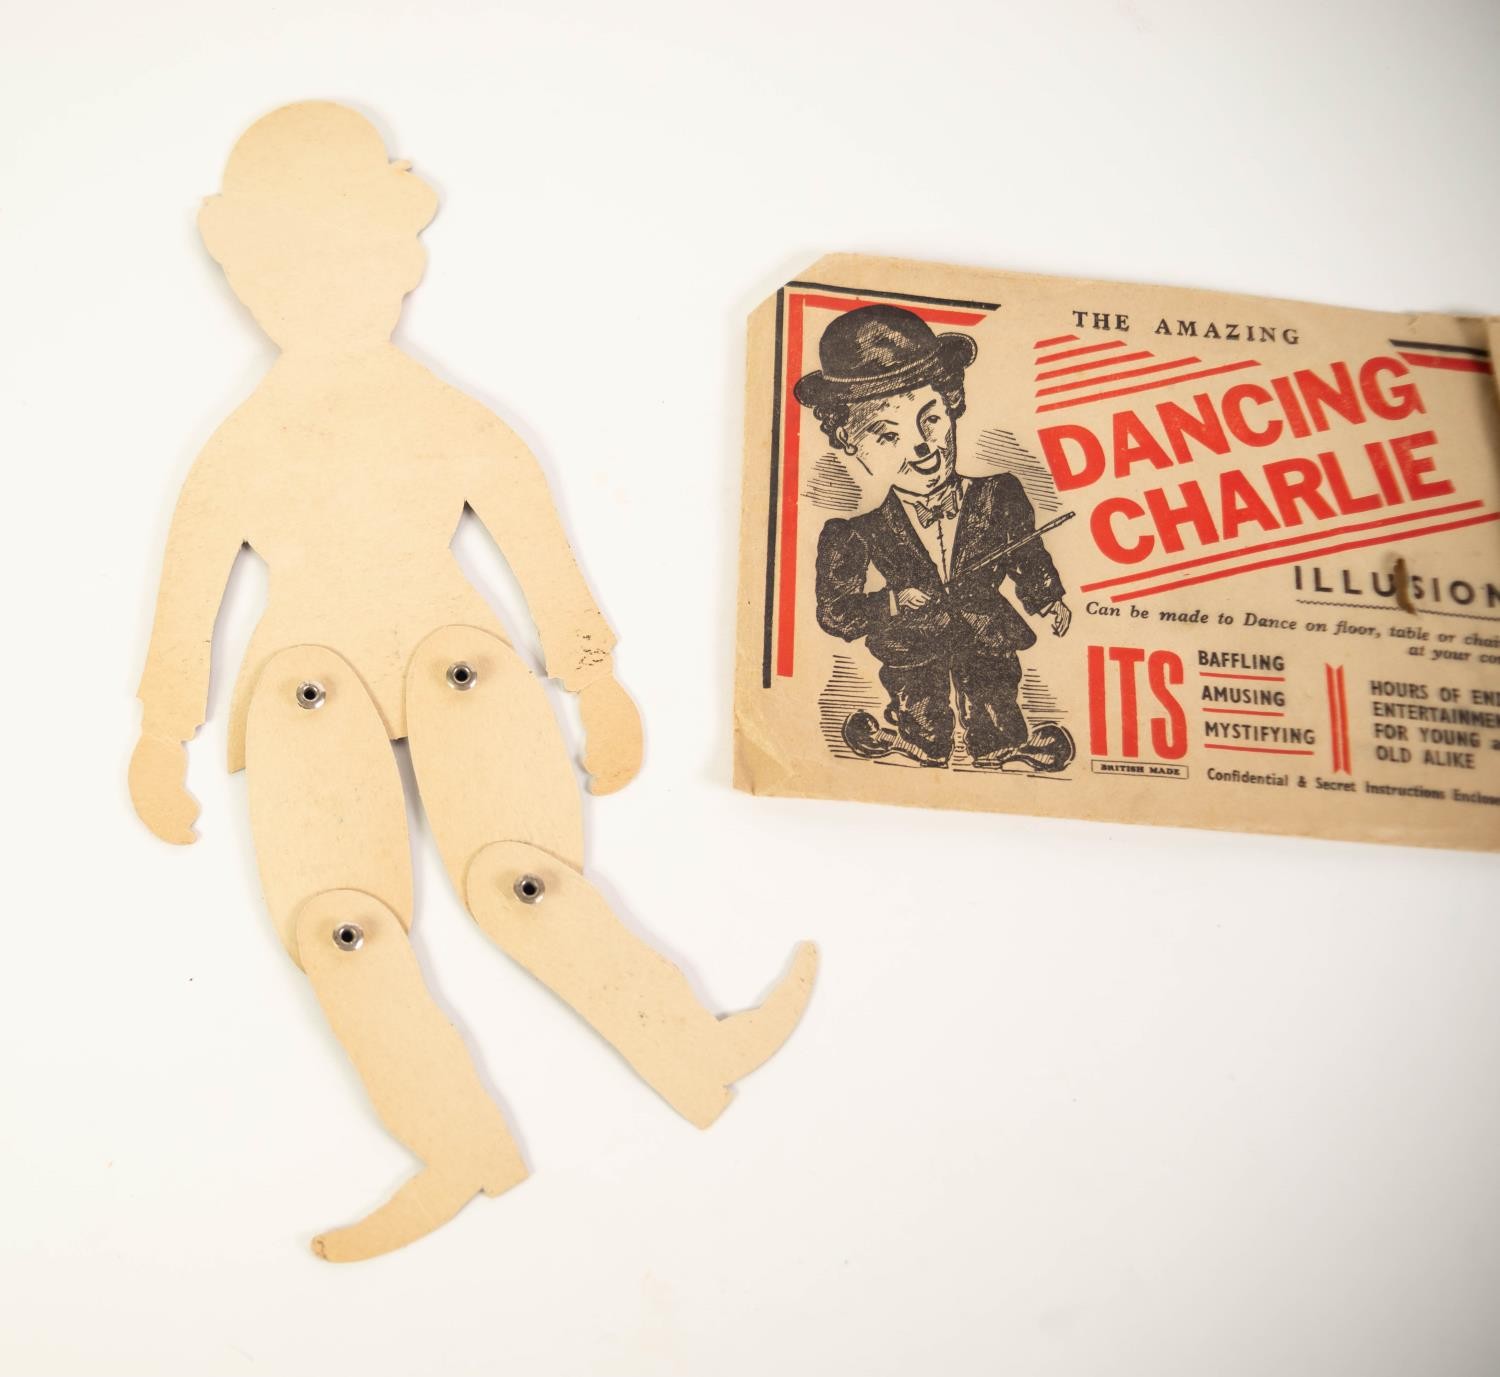 VINTAGE CIRCA 1930's 'THE AMAZING - DANCING CHARLIE' (CHAPLIN) ILLUSION DANCING FIGURE, colour - Image 2 of 2